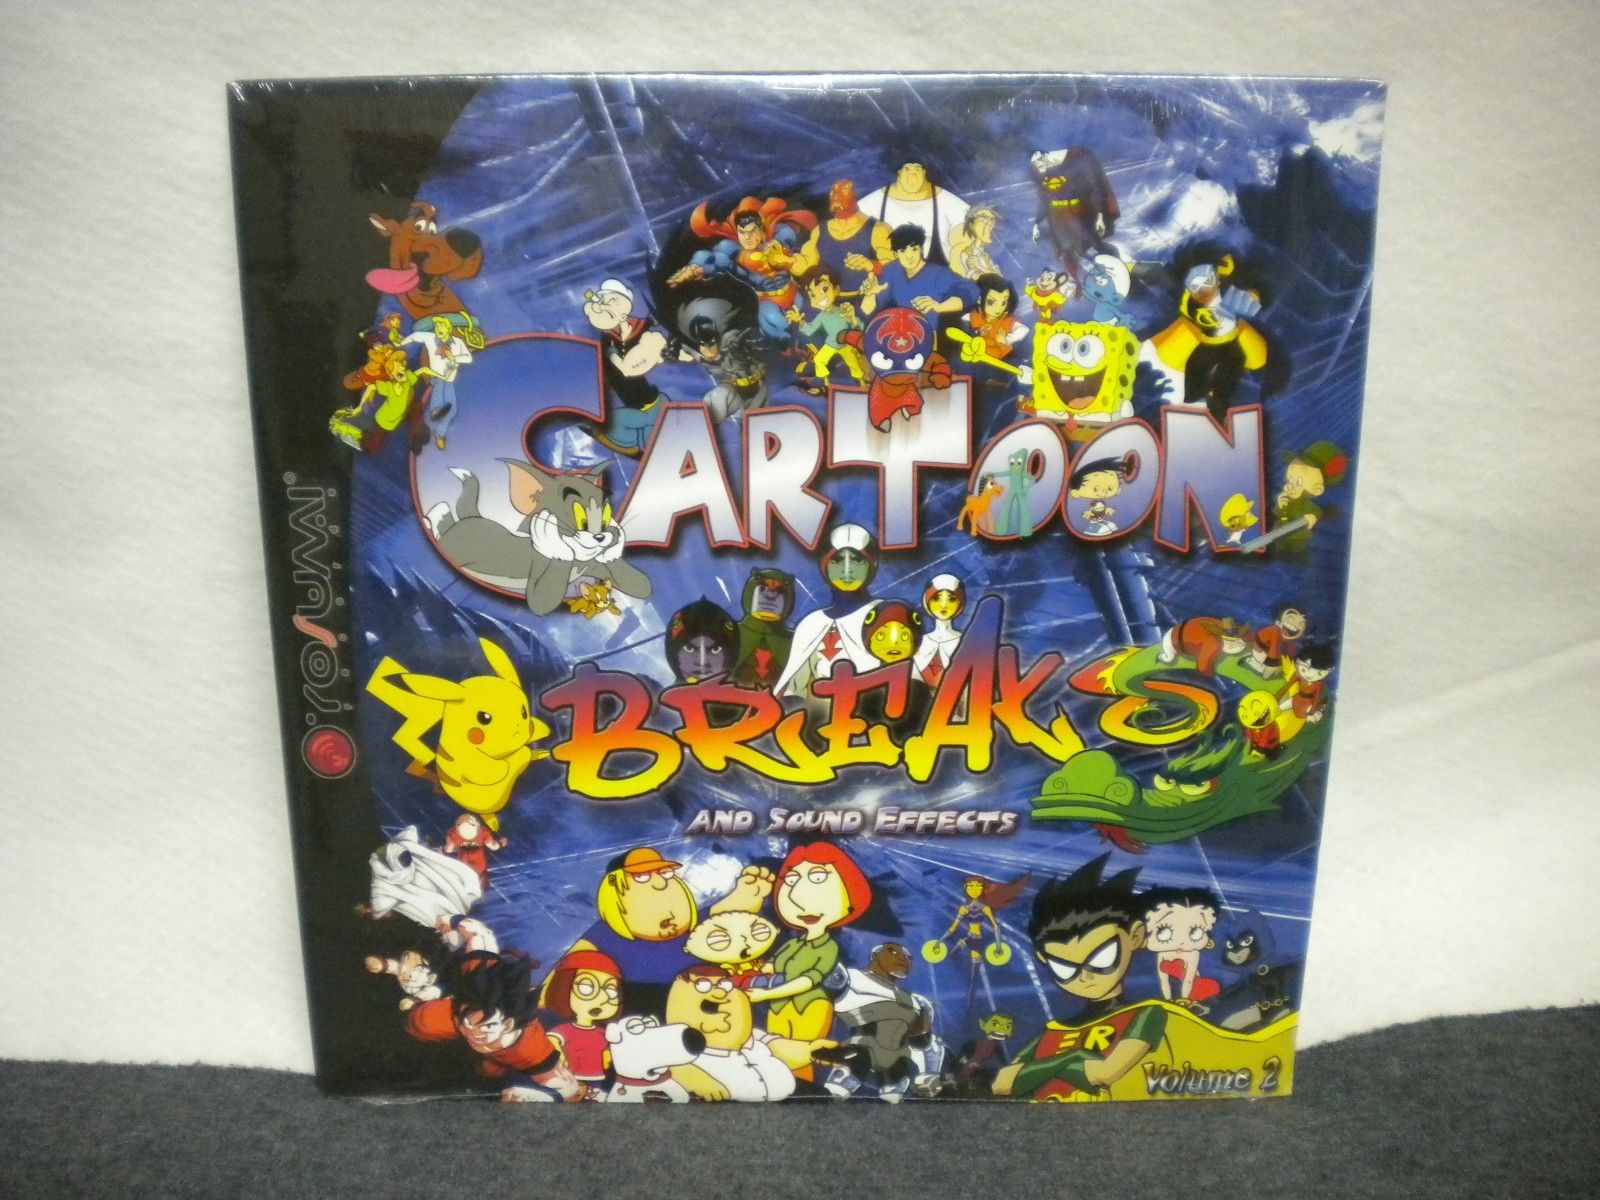  - DJ ROB & FILTHY RICH CARTOON BREAKS & SOUND EFFECTS 33 LP  VINYL NEW AND UNPLAYED - auction details